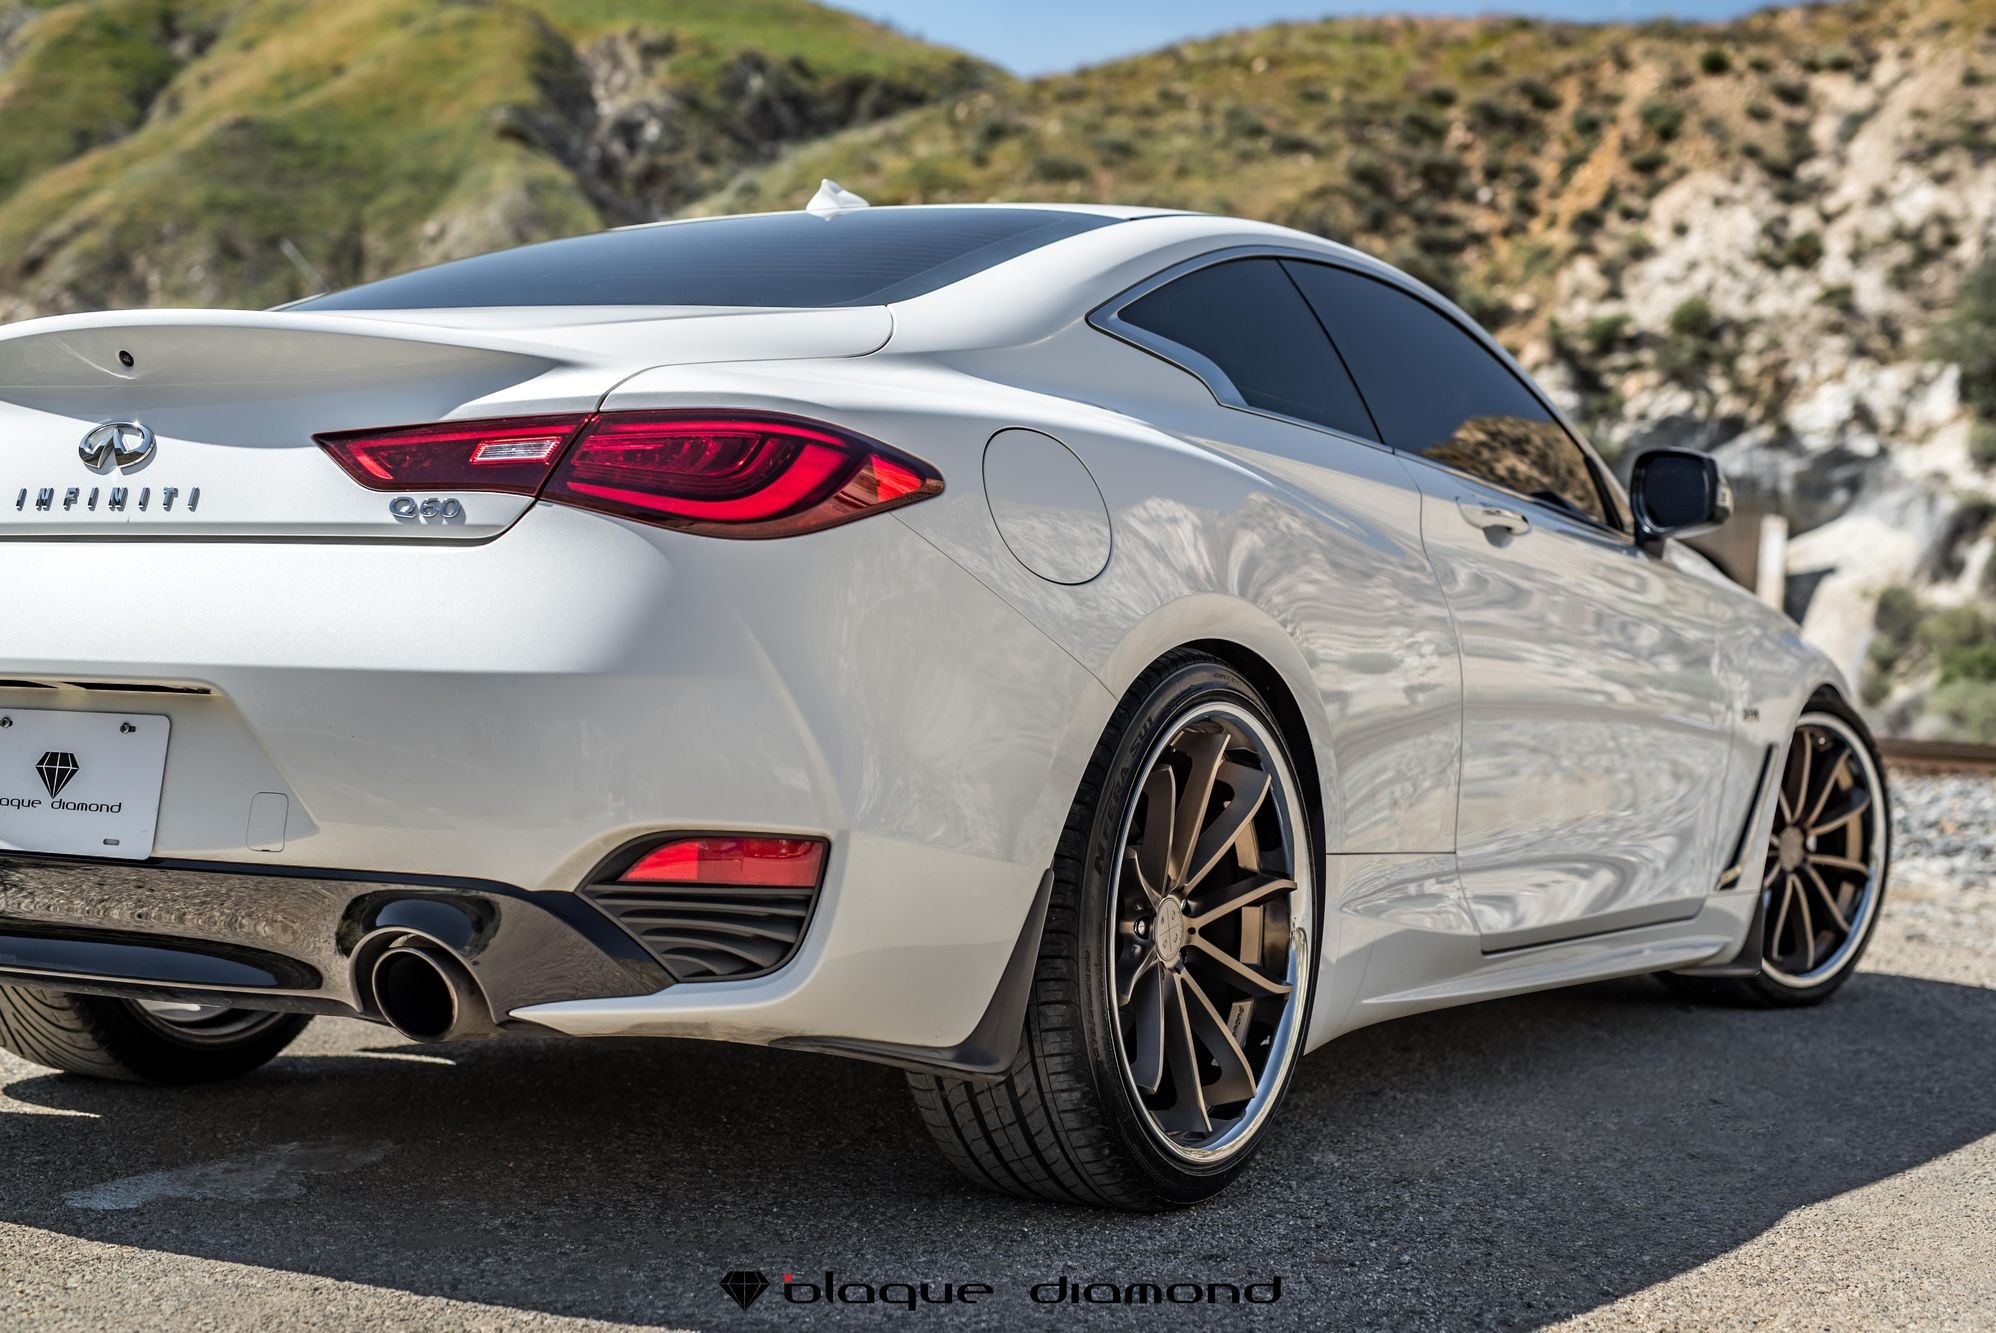 White Infiniti Q60 with Red LED Taillights - Photo by Blaque Diamond